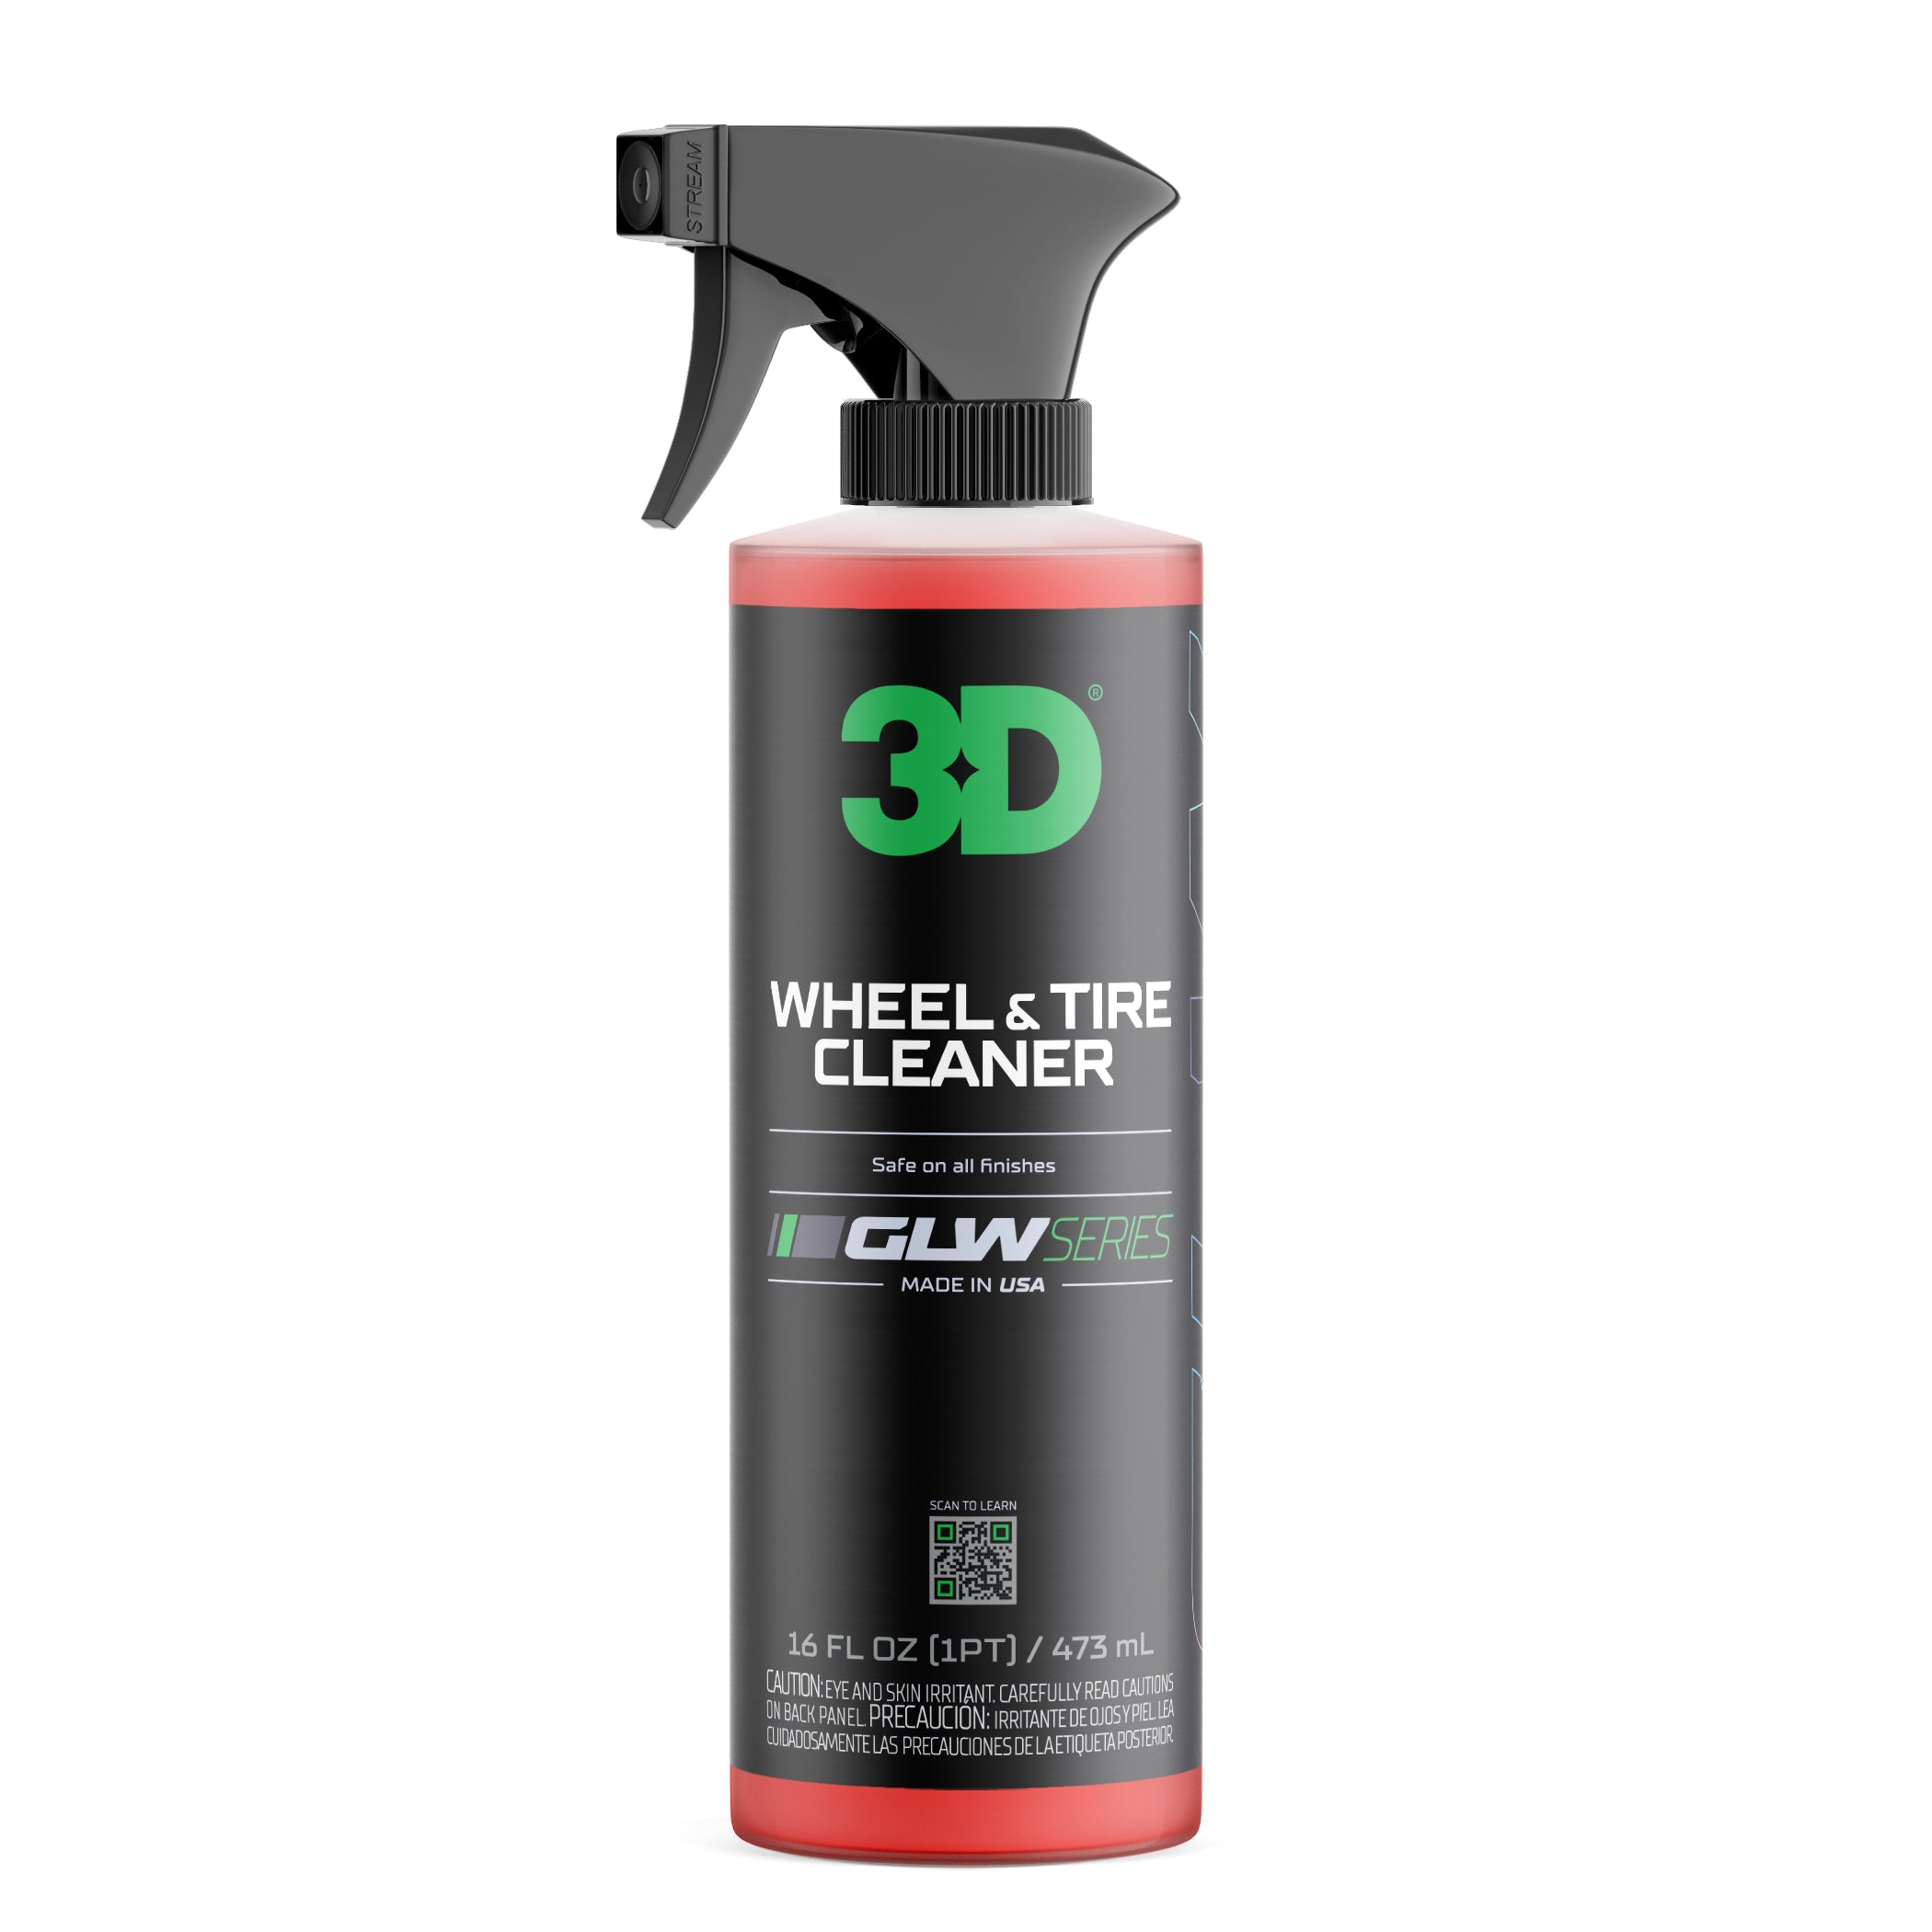 3D Car Care Products 3D LVP Interior Cleaner - Removes Dirt, Grime